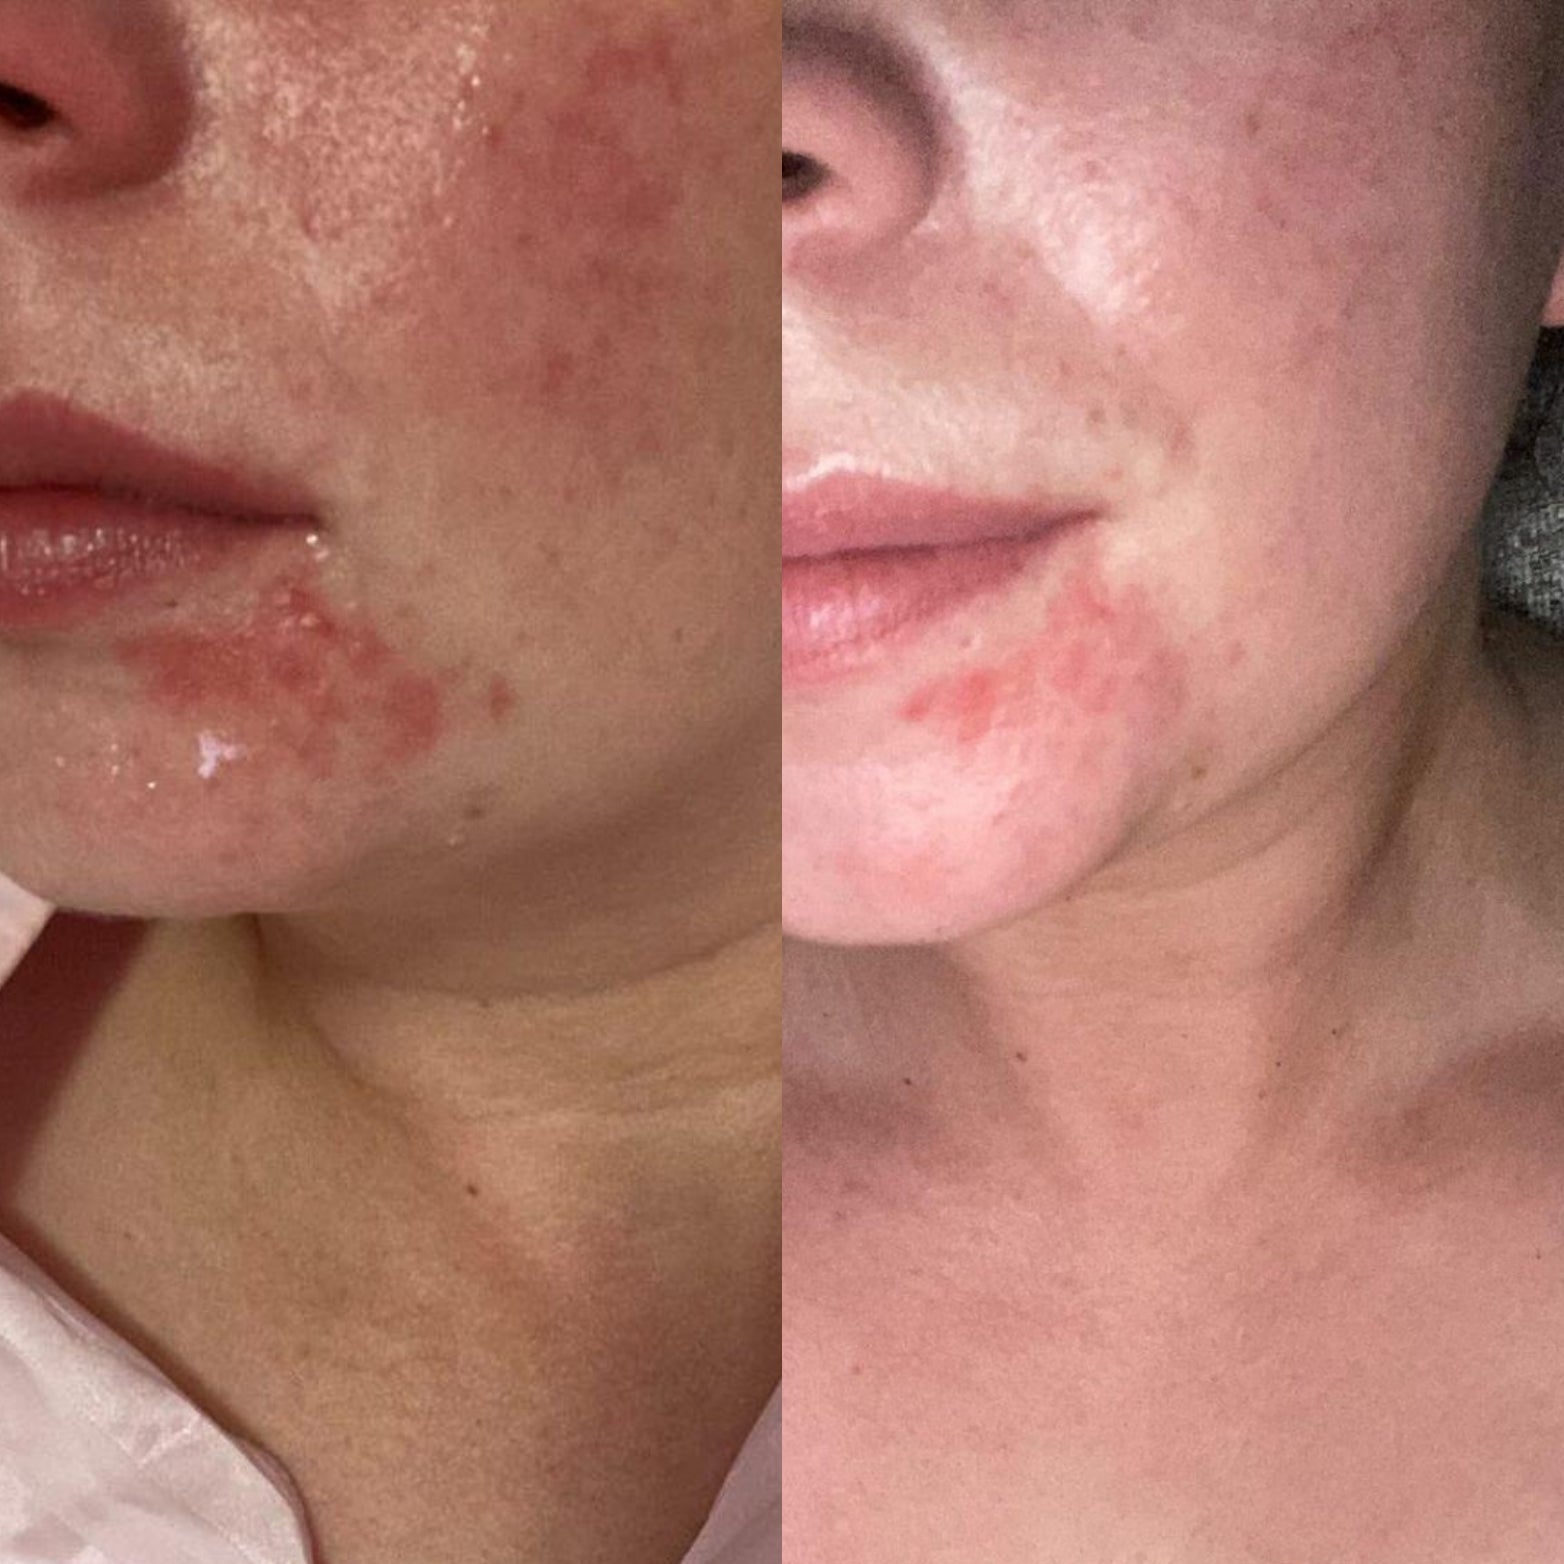 Before and after photos, results in 4 days, social proof.Nourishing face oil serum for sensitive skin, preservative free, soothes, brightens and softens skin, Infused with natural ingredients. Skincare for sensitive skin. Anti-ageing, fine lines, Natural, vegan and cruelty-free skincare. Breastfeeding friendly, pregnancy safe. Facial oil for sensitive skin, Oil serum. All natural. 